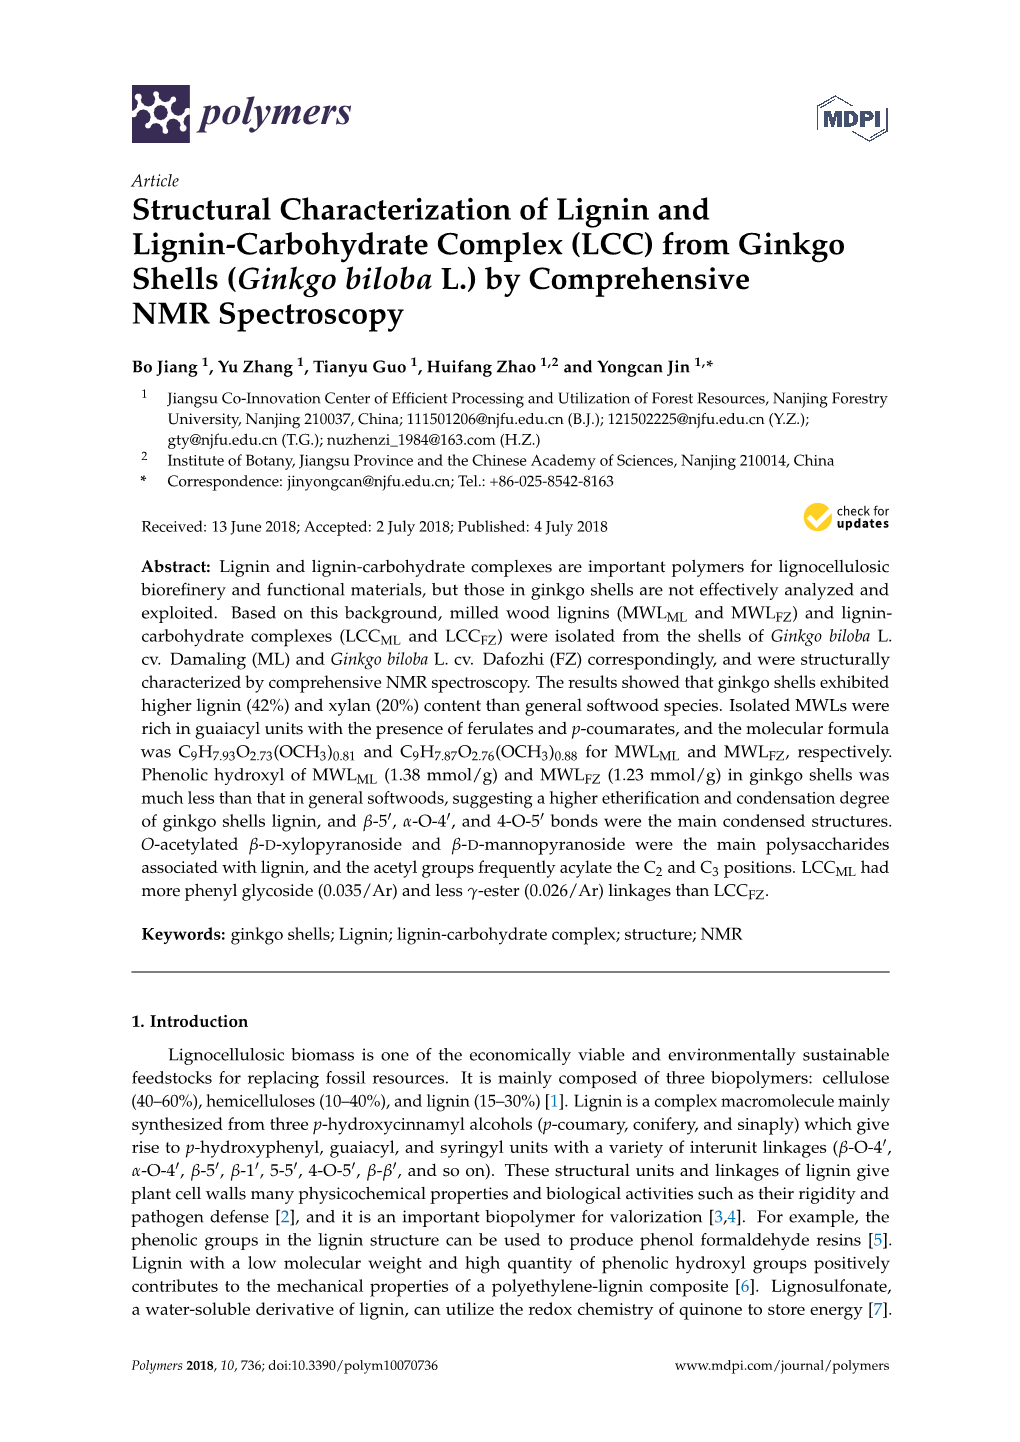 Structural Characterization of Lignin and Lignin-Carbohydrate Complex (LCC) from Ginkgo Shells (Ginkgo Biloba L.) by Comprehensive NMR Spectroscopy